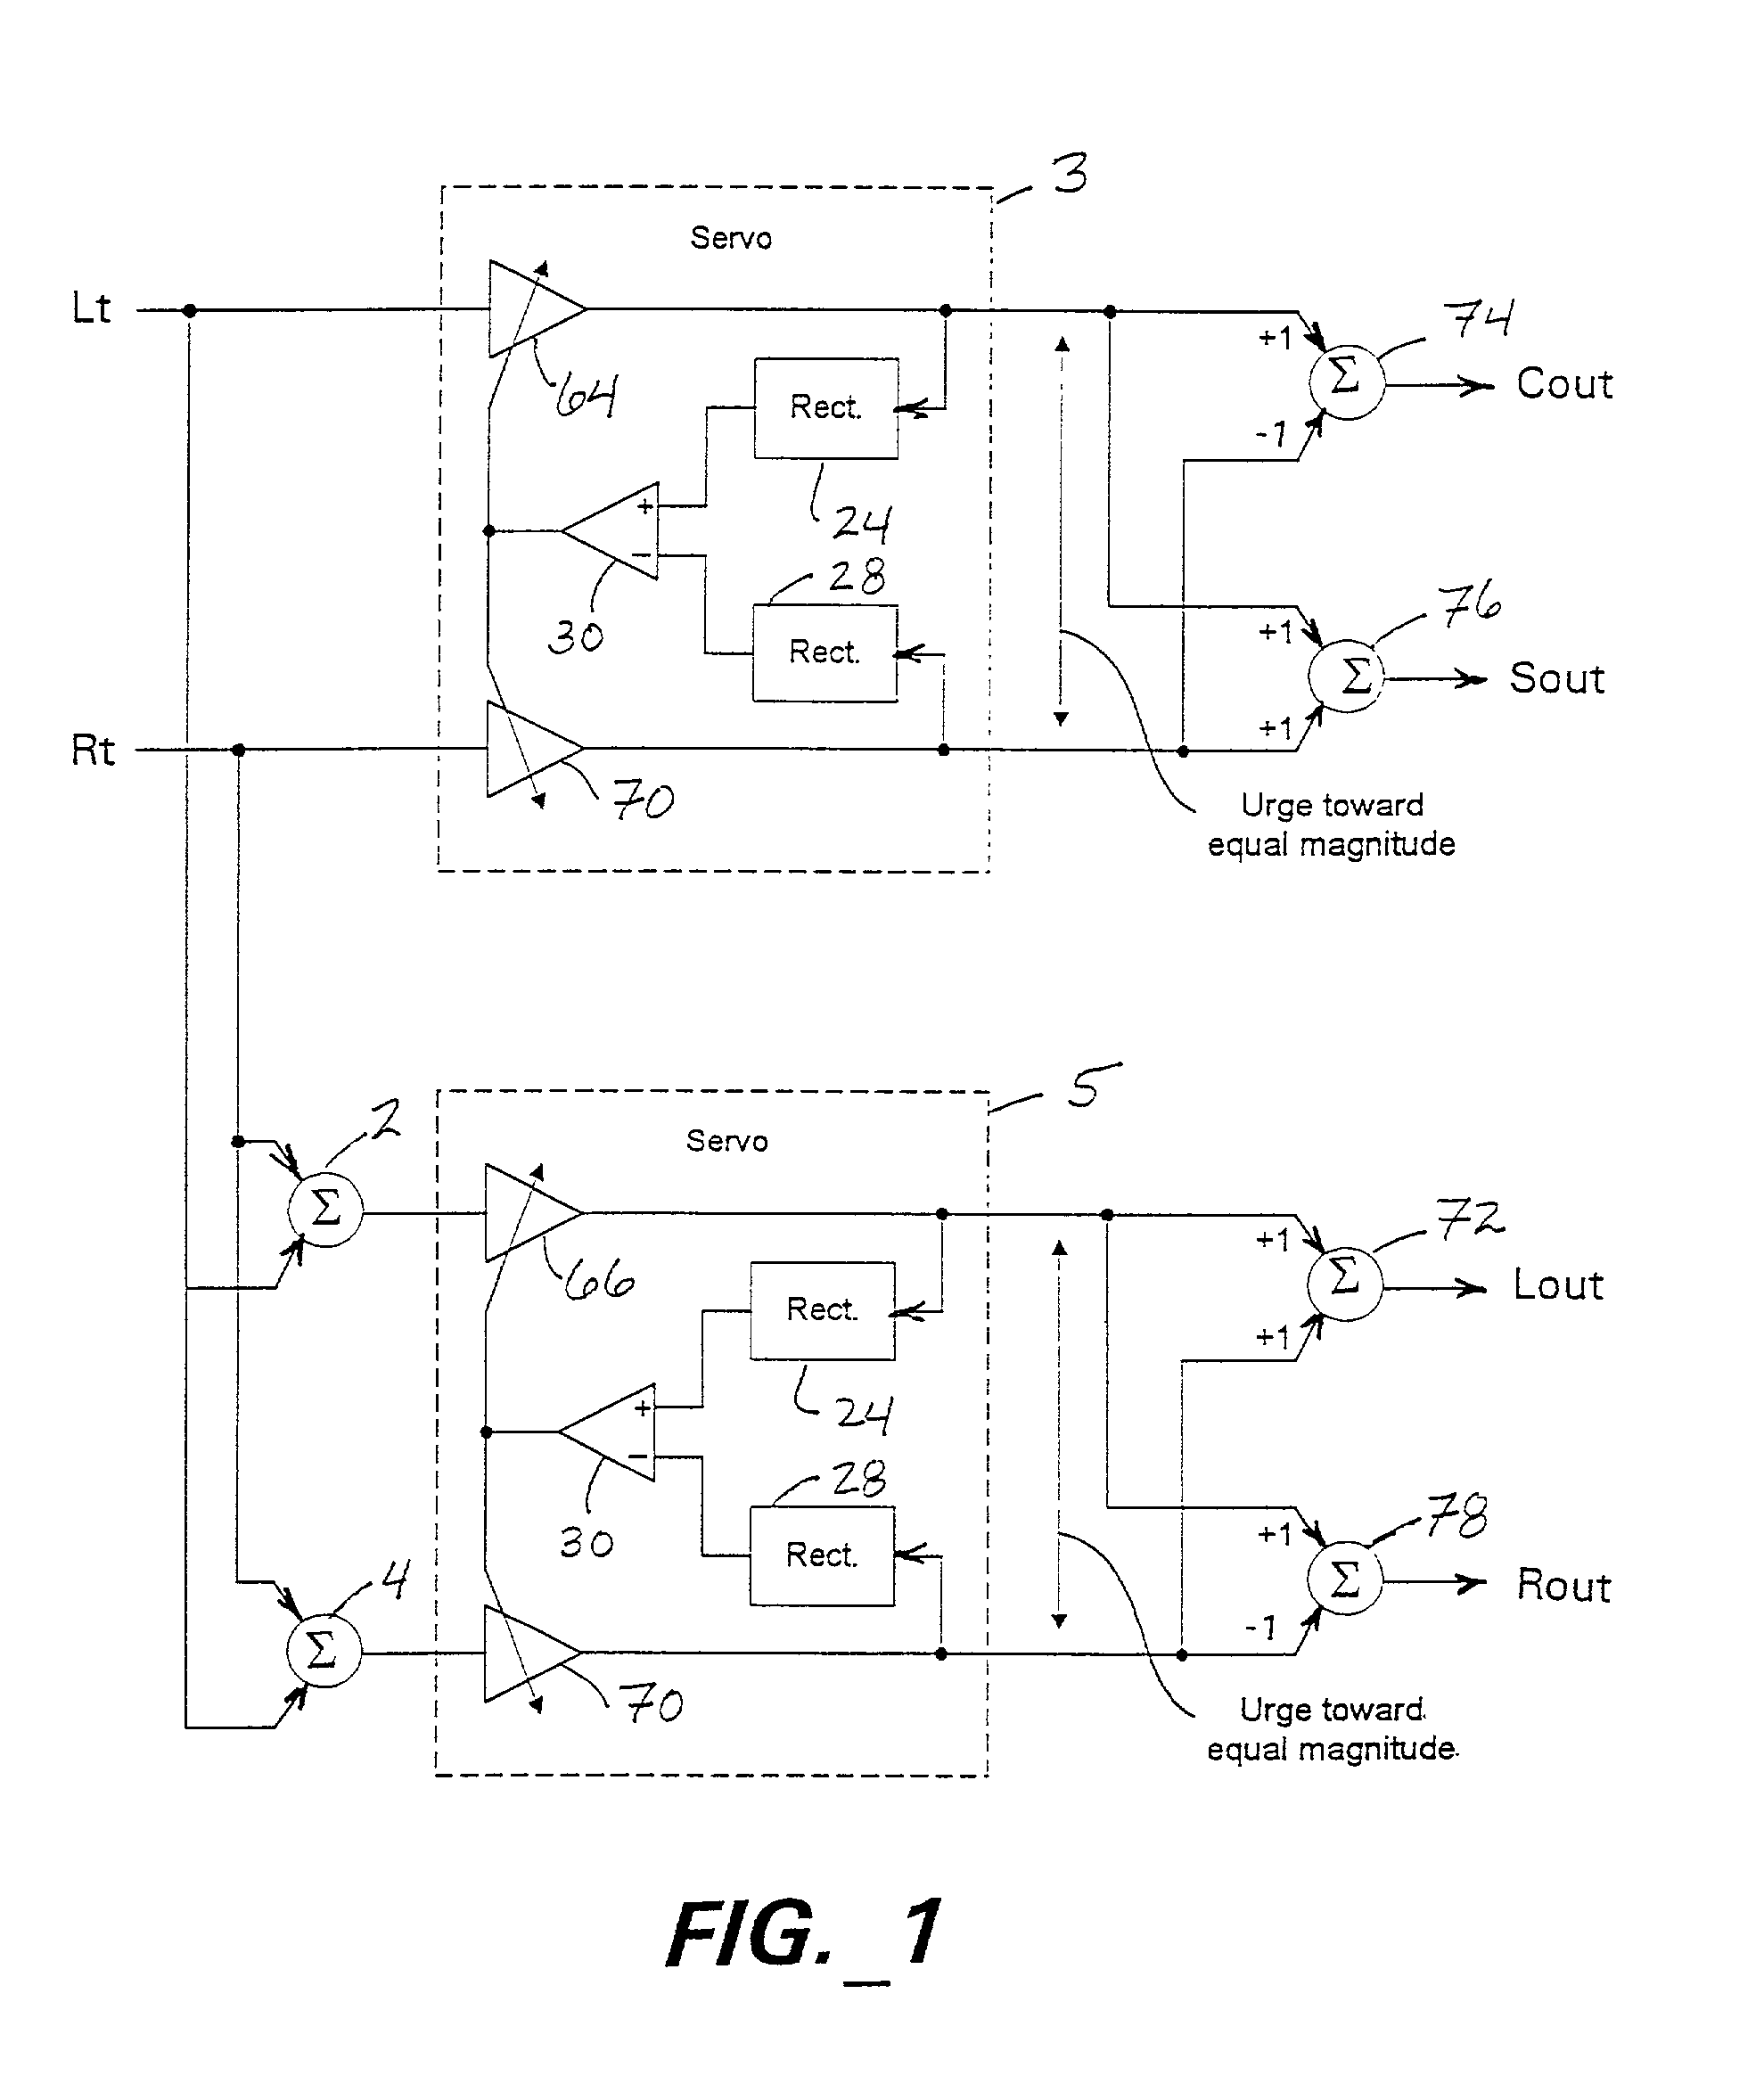 Method and apparatus for deriving at least one audio signal from two or more input audio signals